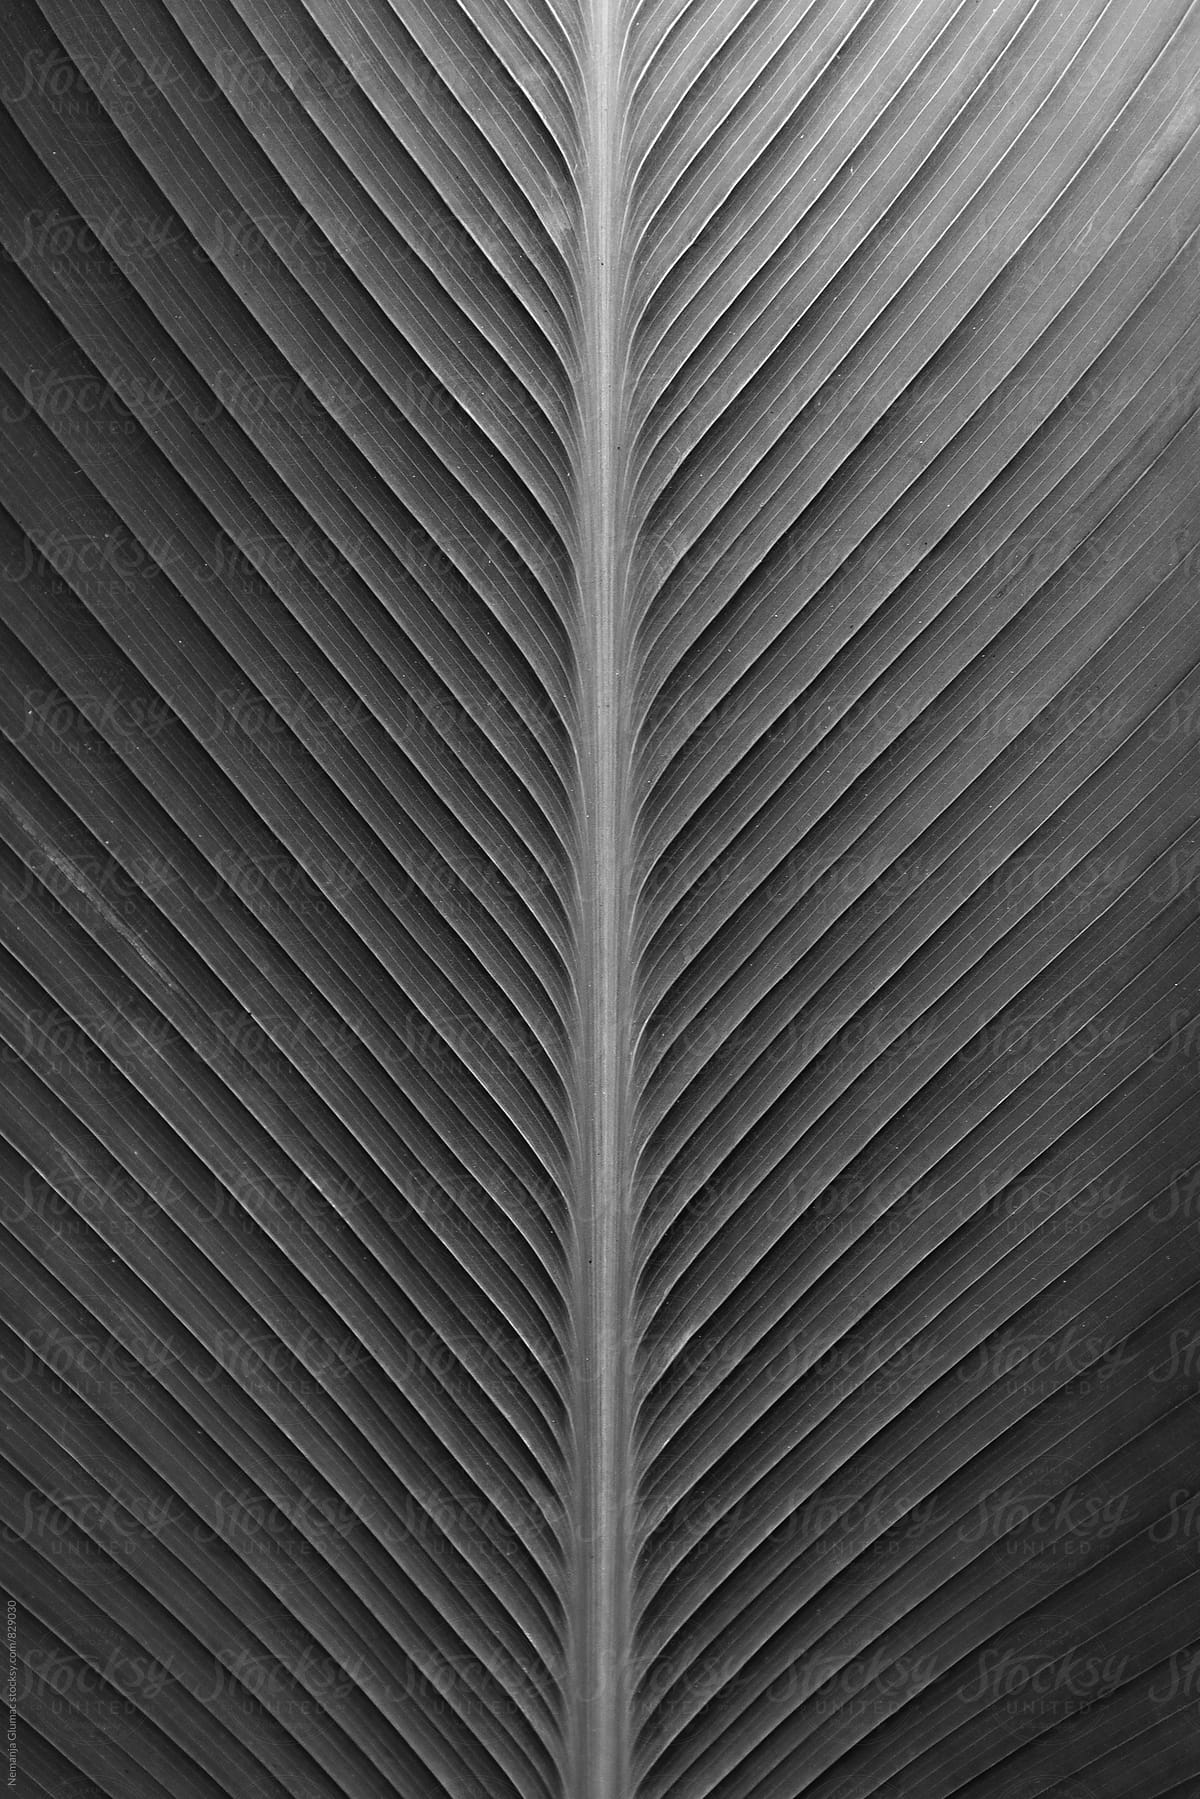 Symmetrical Tropical Leaf Surface in Black and White